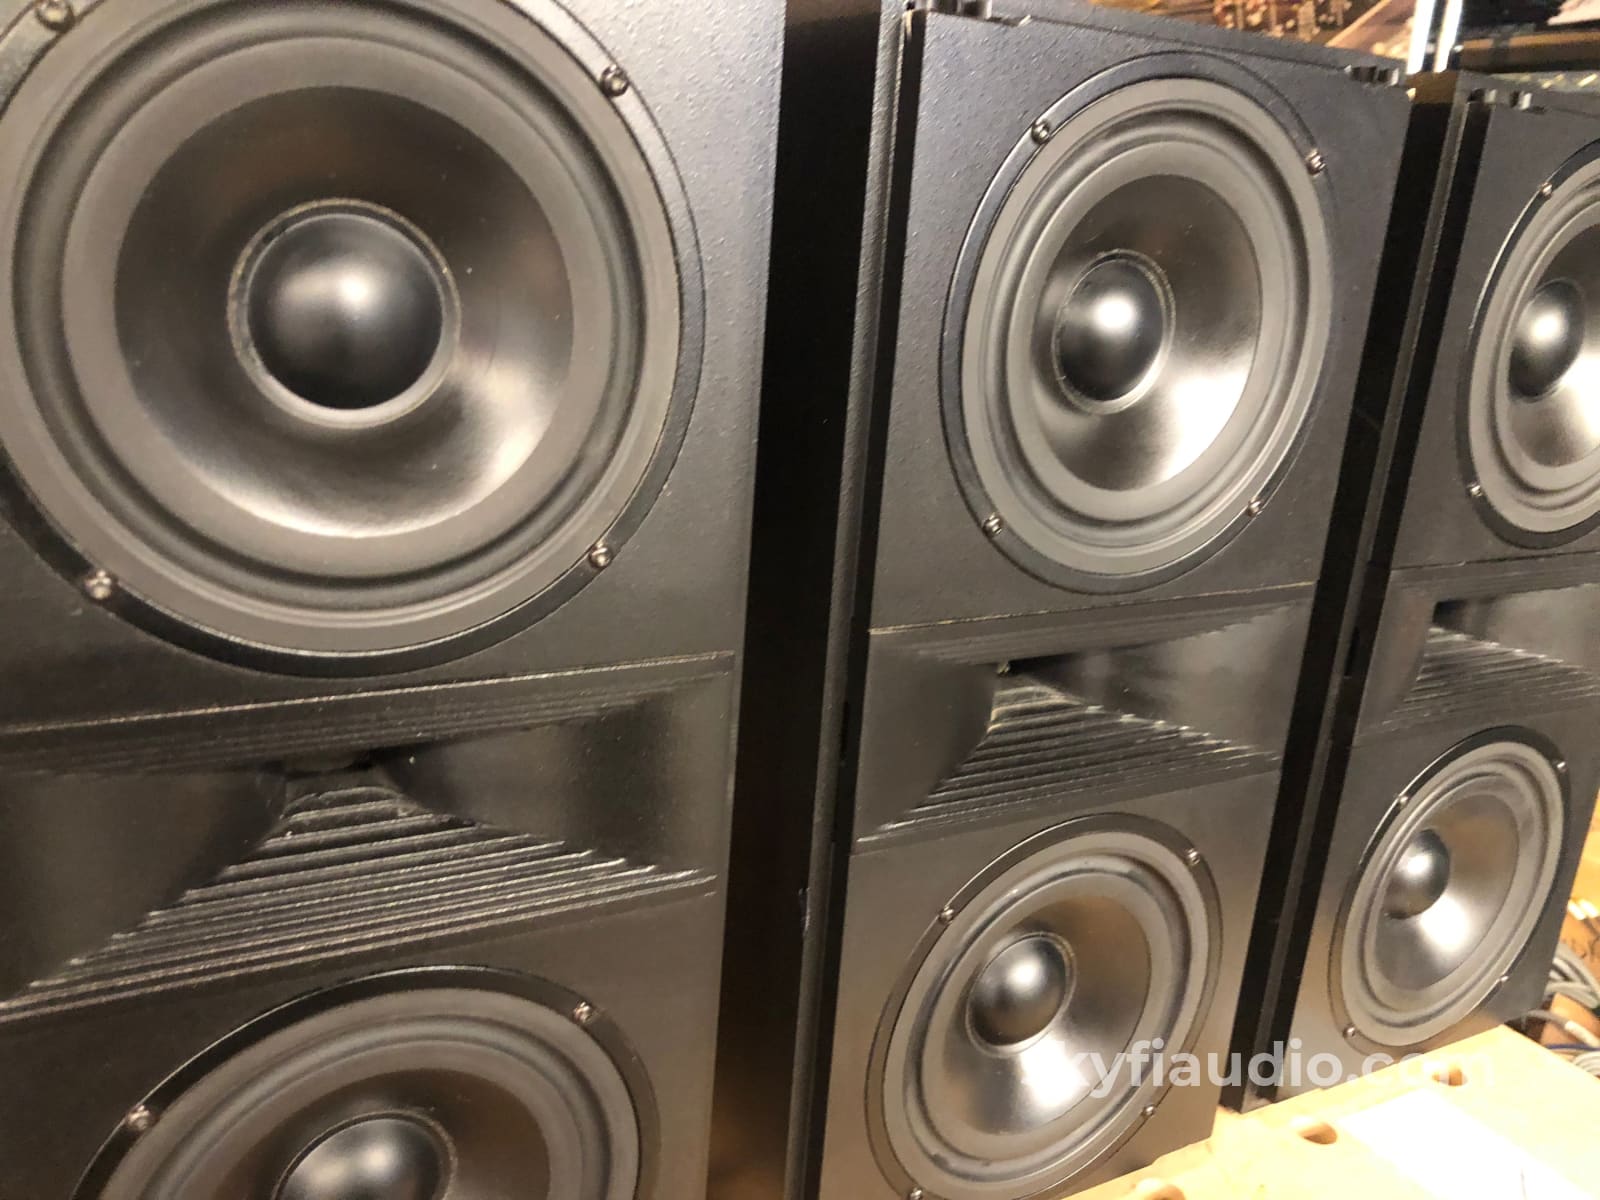 Triad Home Cinema Classic Lcr Speakers - Thx Rated